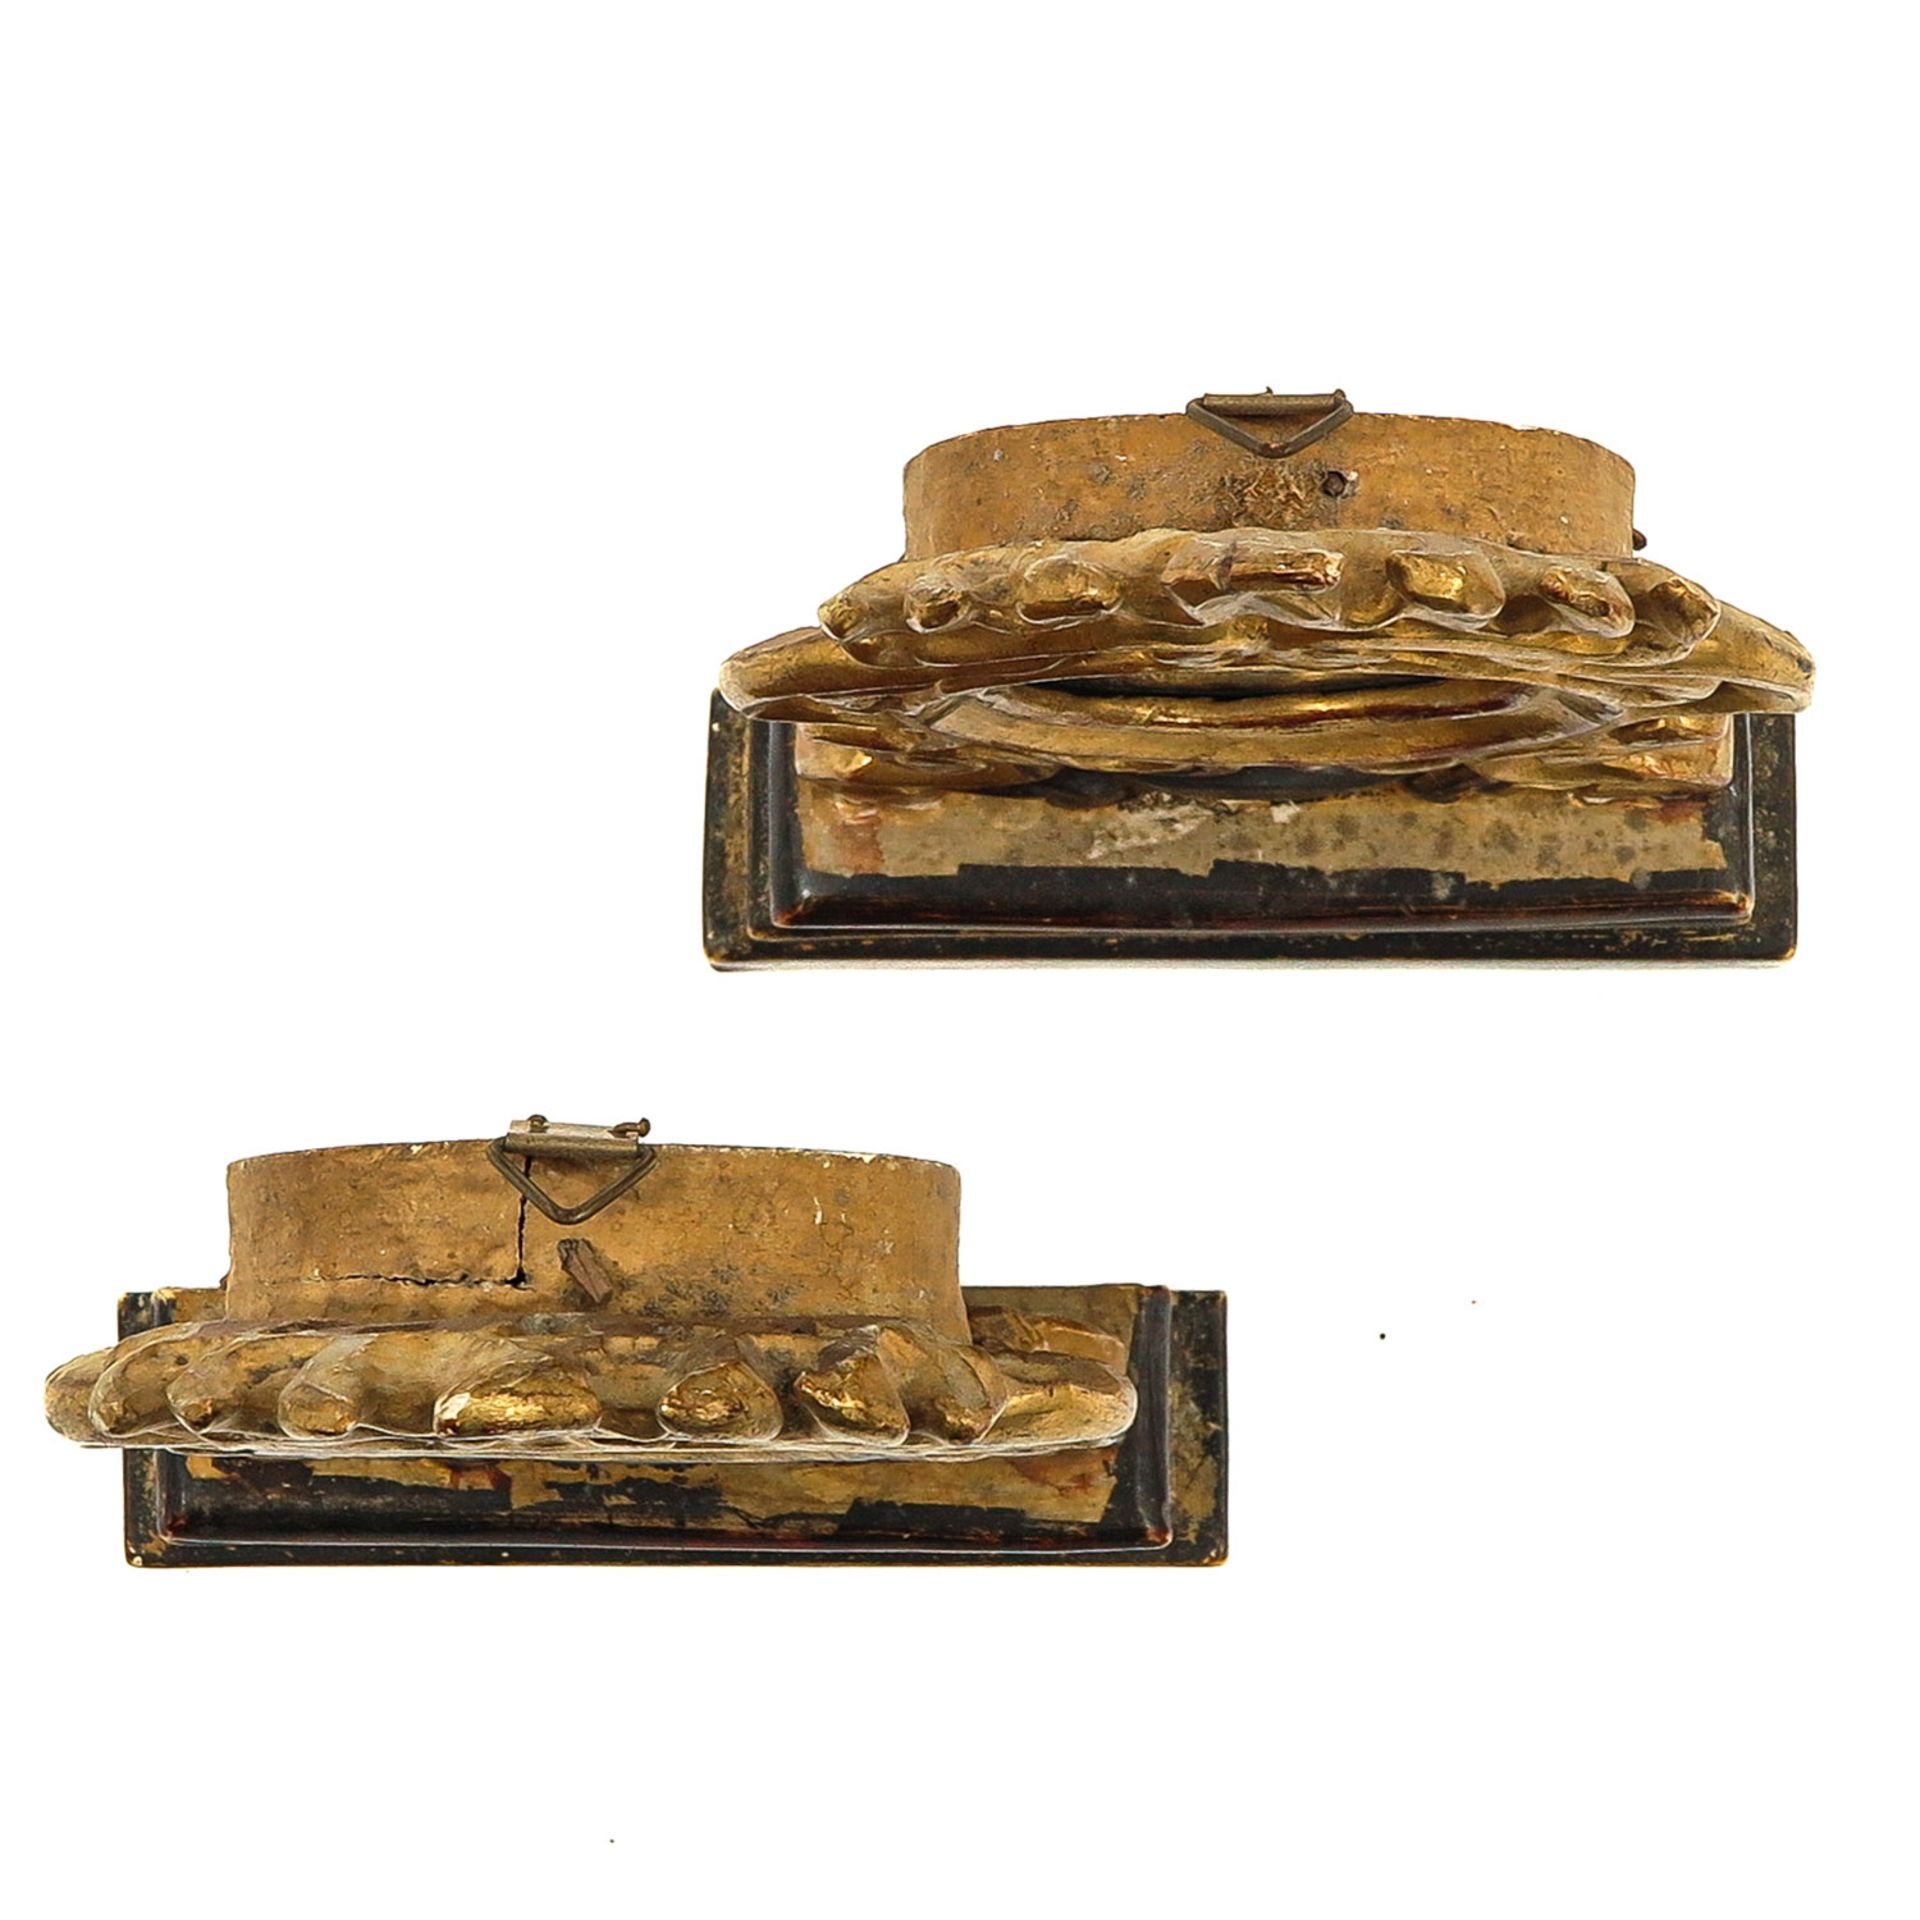 A Pair of Relic Holders Each Holding 5 Relics - Image 5 of 7